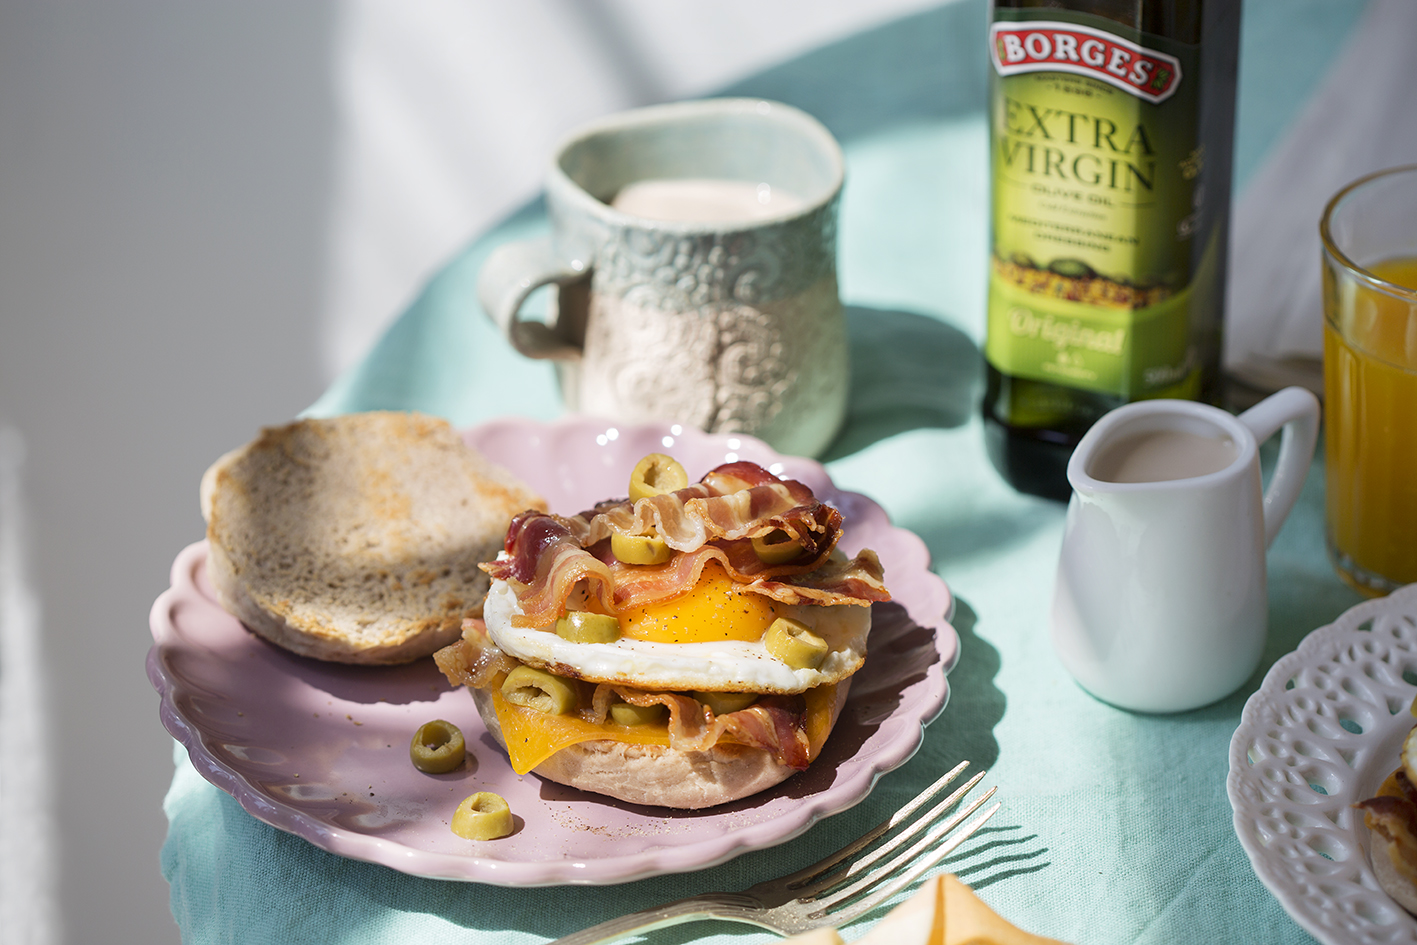 Eggs on English muffins, the perfect breakfast for the whole family